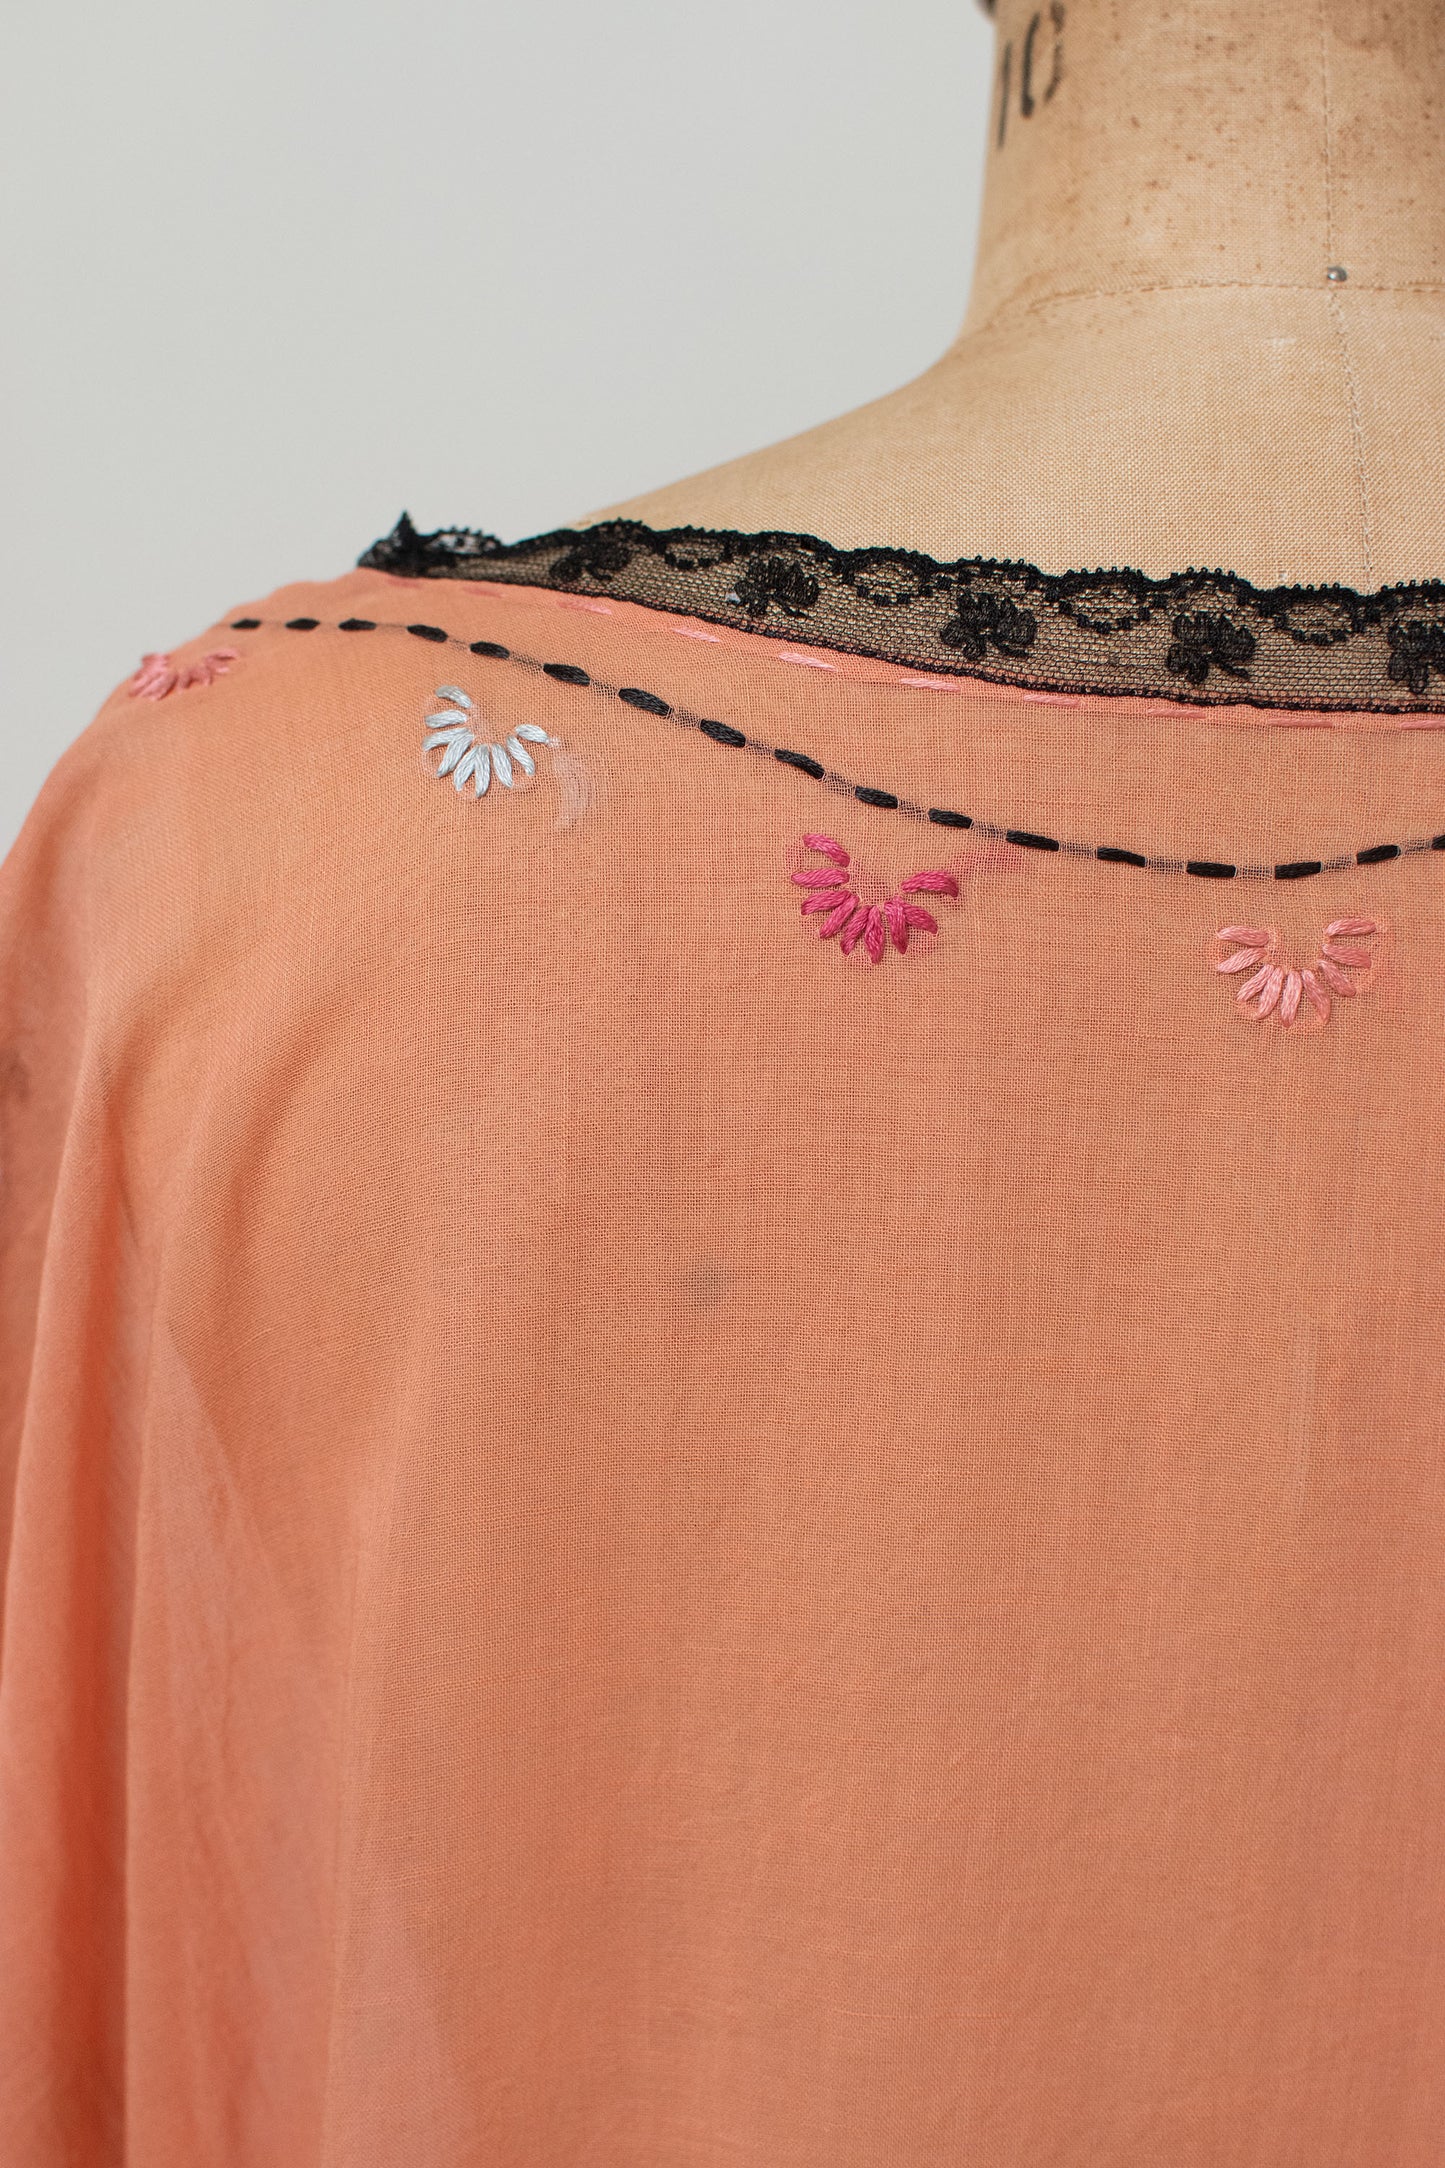 1920s Embroidered Negligee